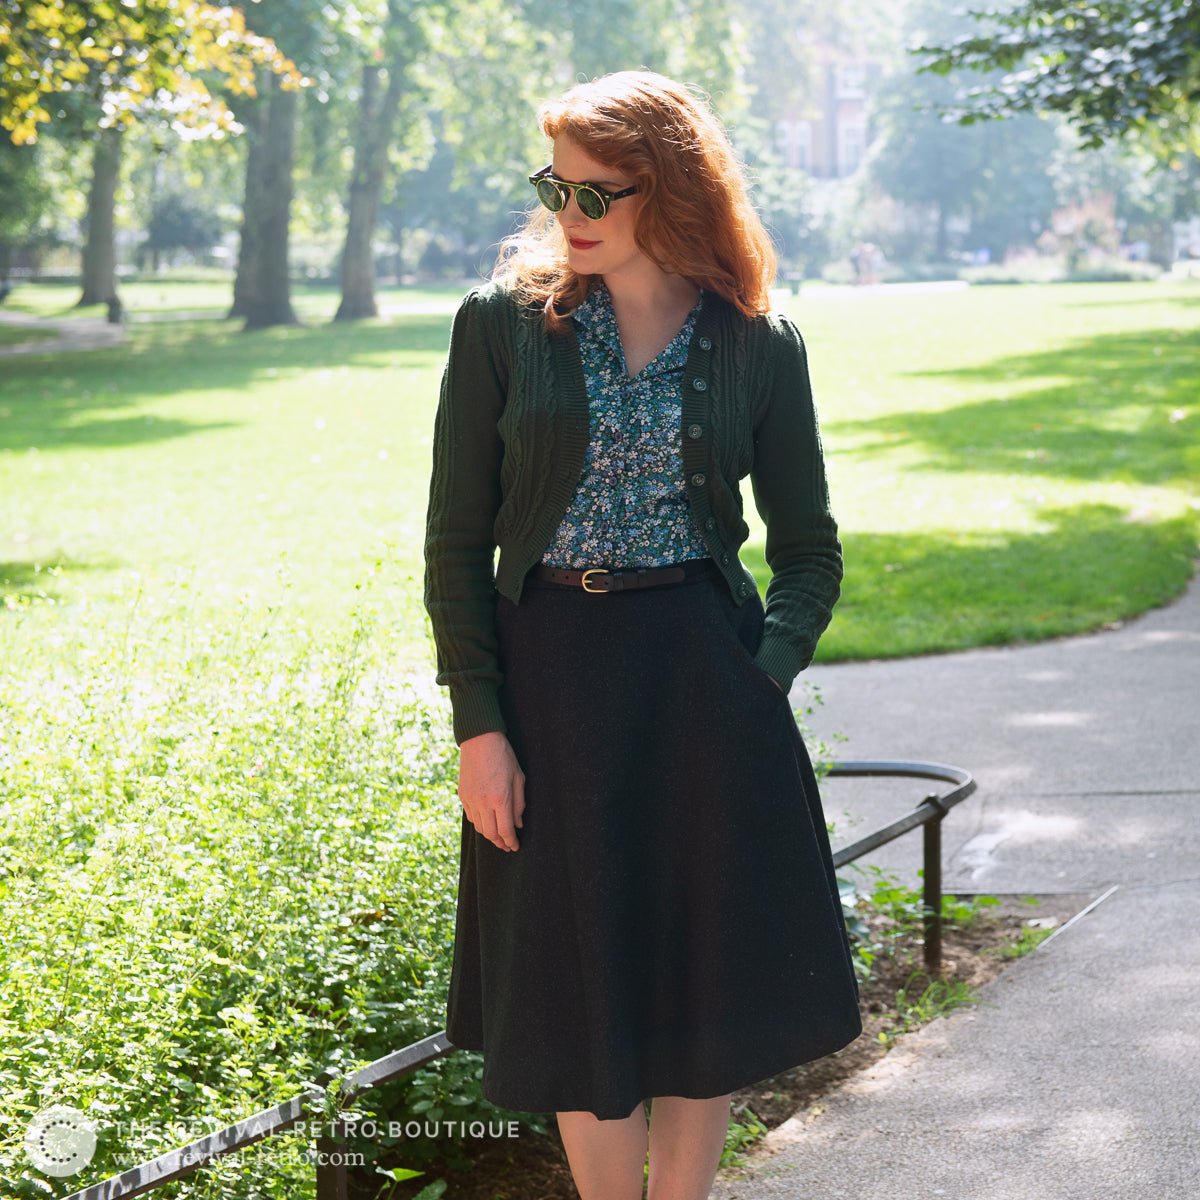 1940s inspired vintage outfit made up of a cropped knitted Emmy Cardigan in pine green, Liberty print blouse and charcoal a-line skirt, all worn by a white model with ginger hair and 1940s round sunglasses